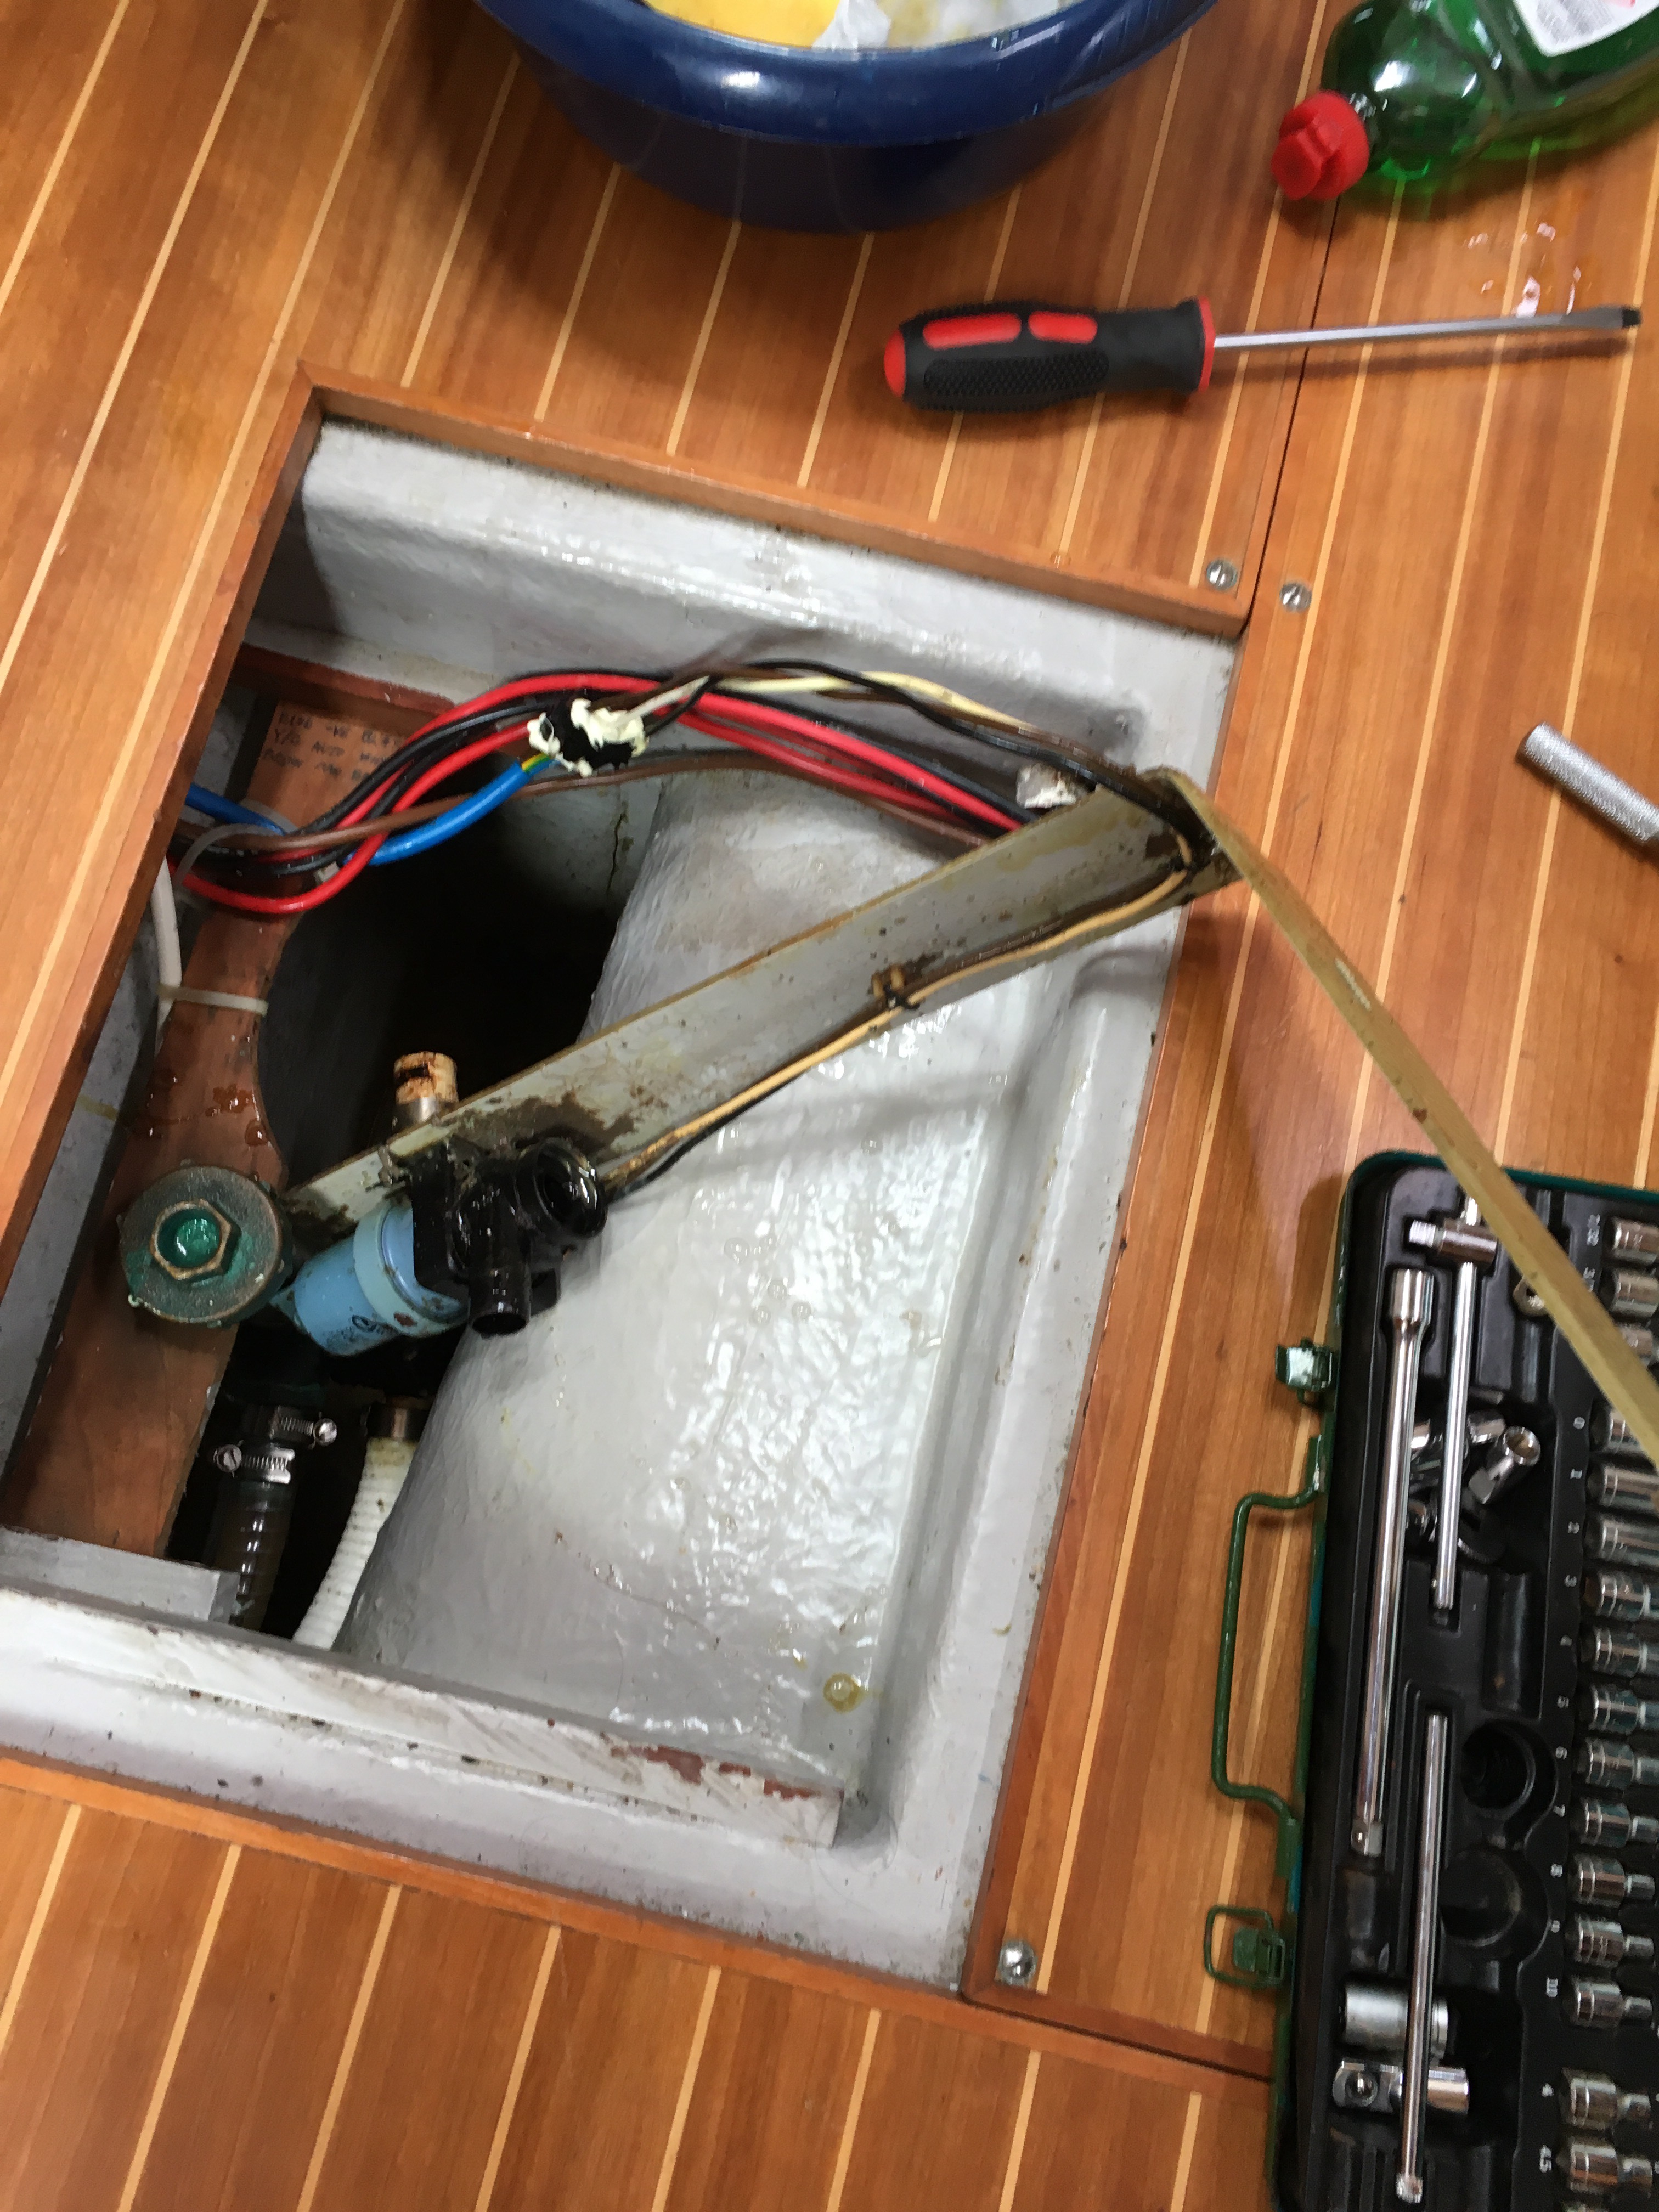 Cleaning the bilge